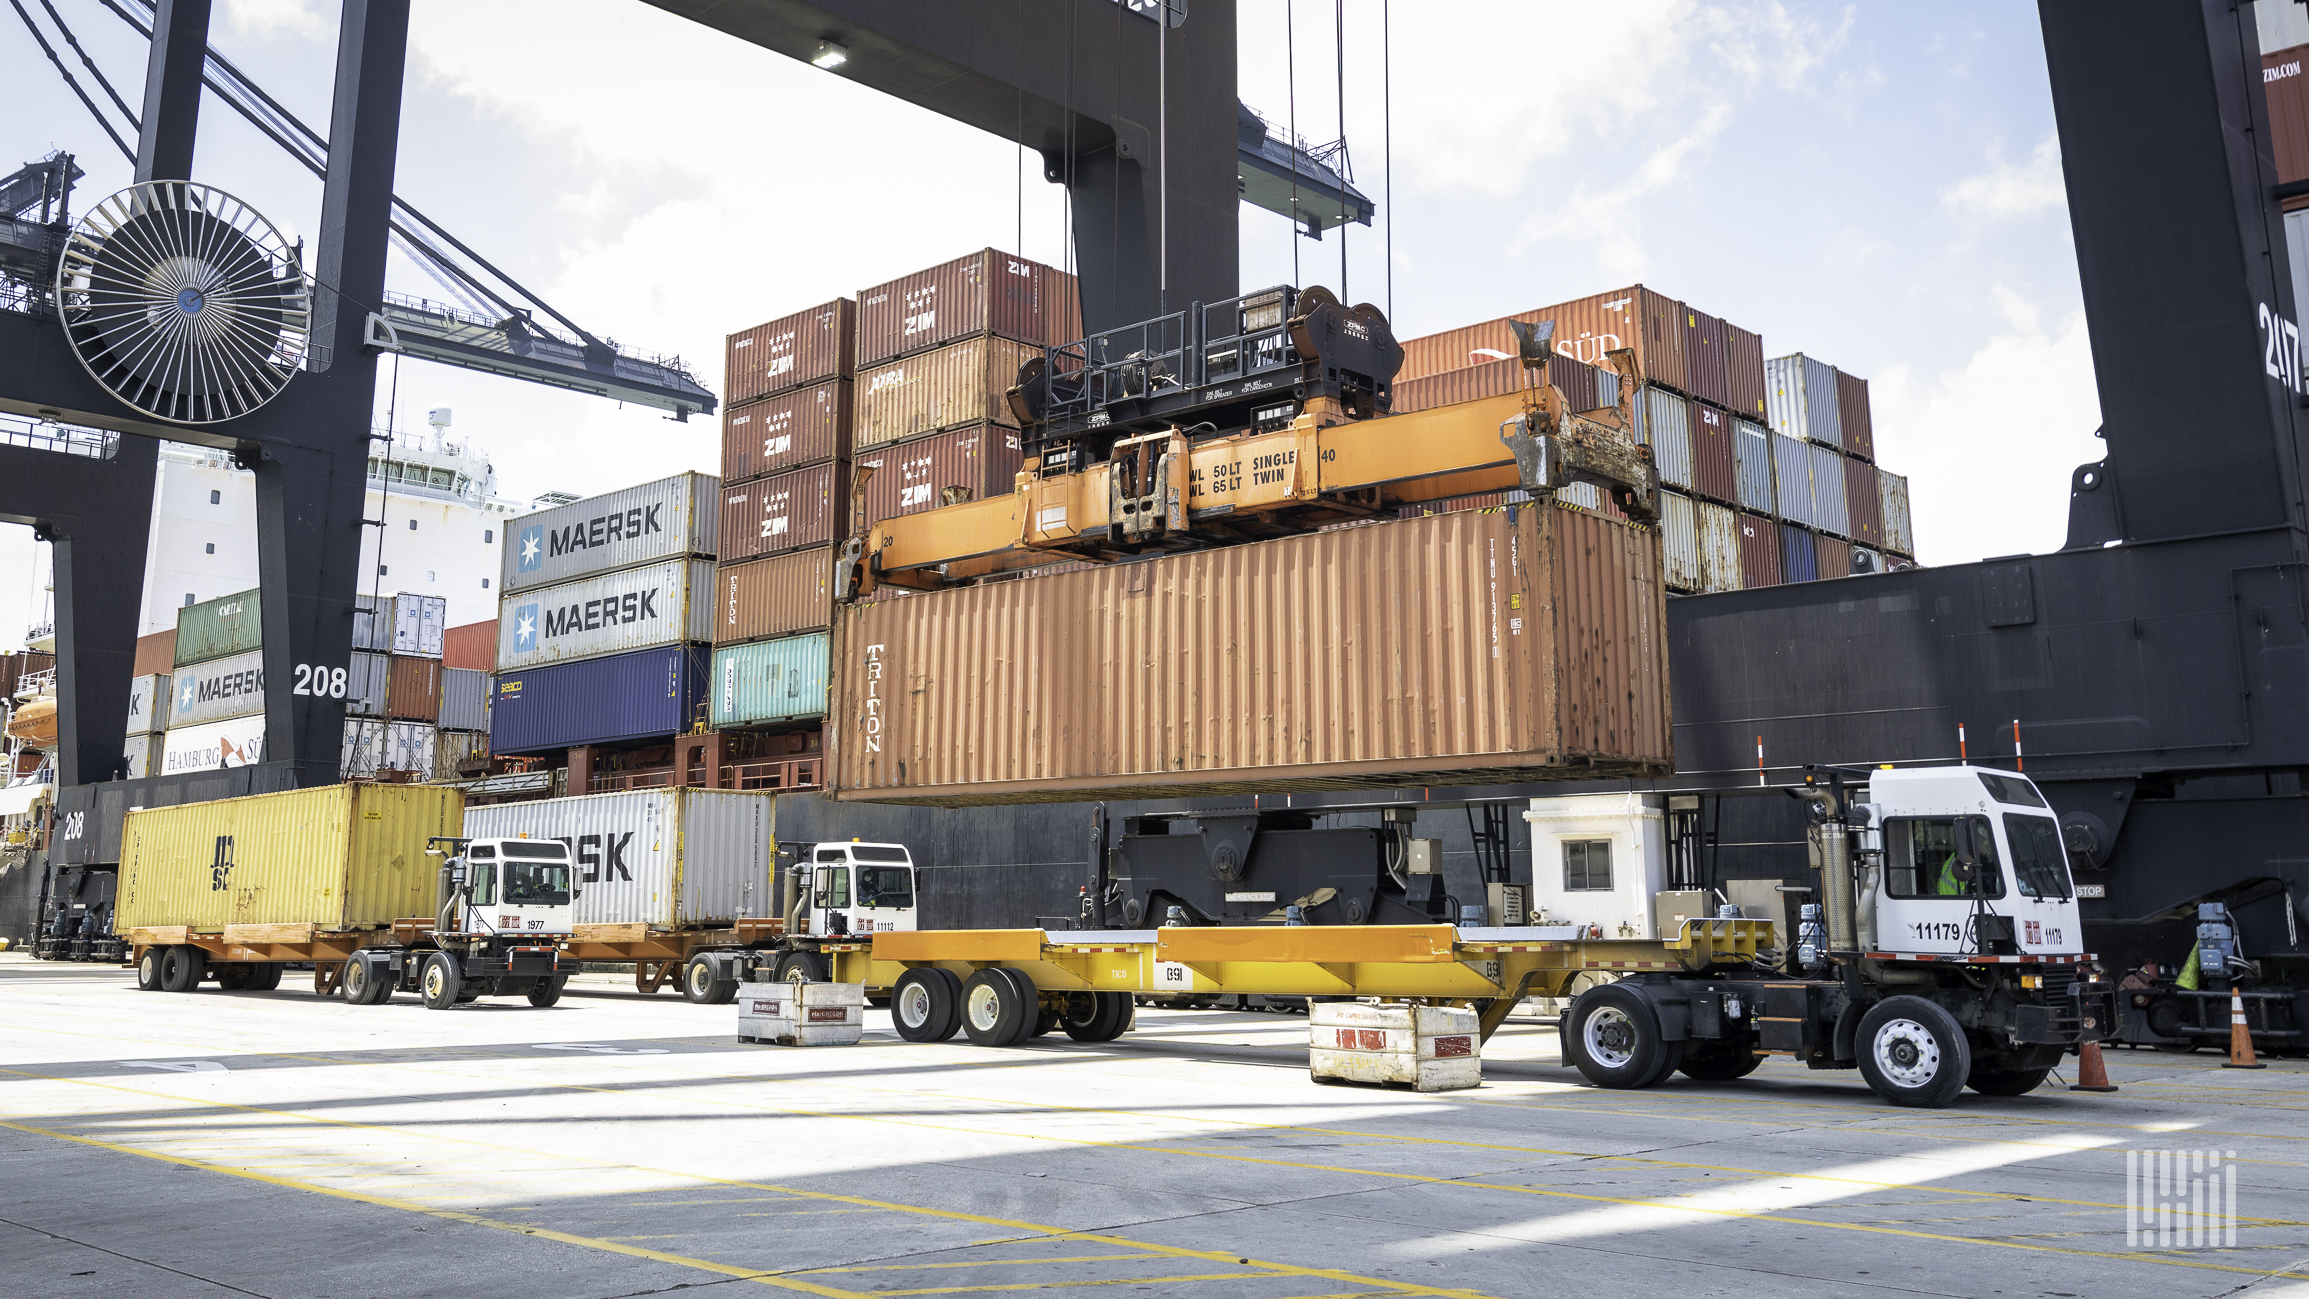 A crane lowers a container from a vessel onto a shuttle cart.